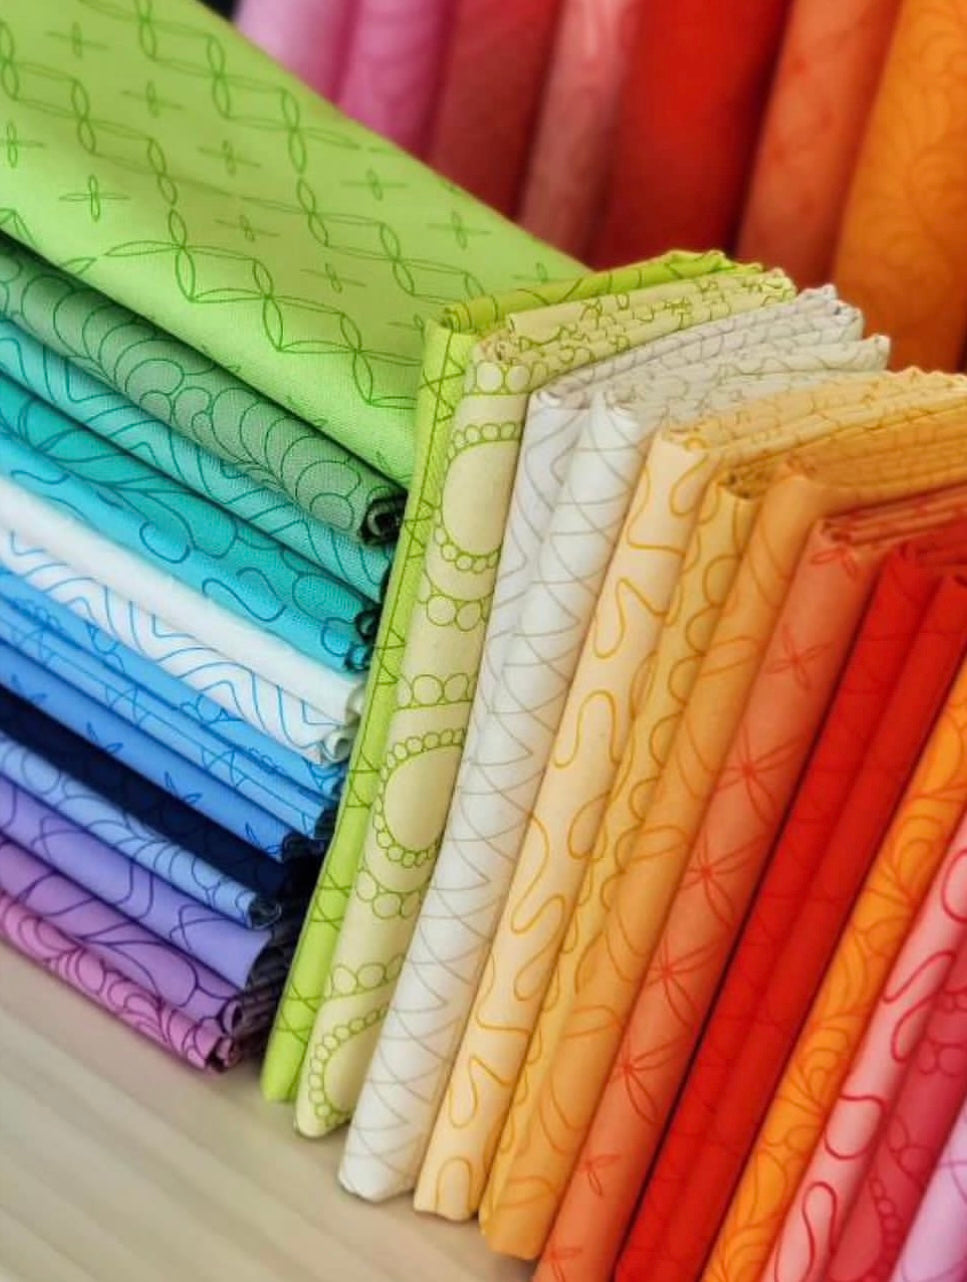 colour - Rainbow sherbet with fun quilty design by Sarah Ditty for Moda Fabric at 2 Sew Textiles Art Quilt Supplies